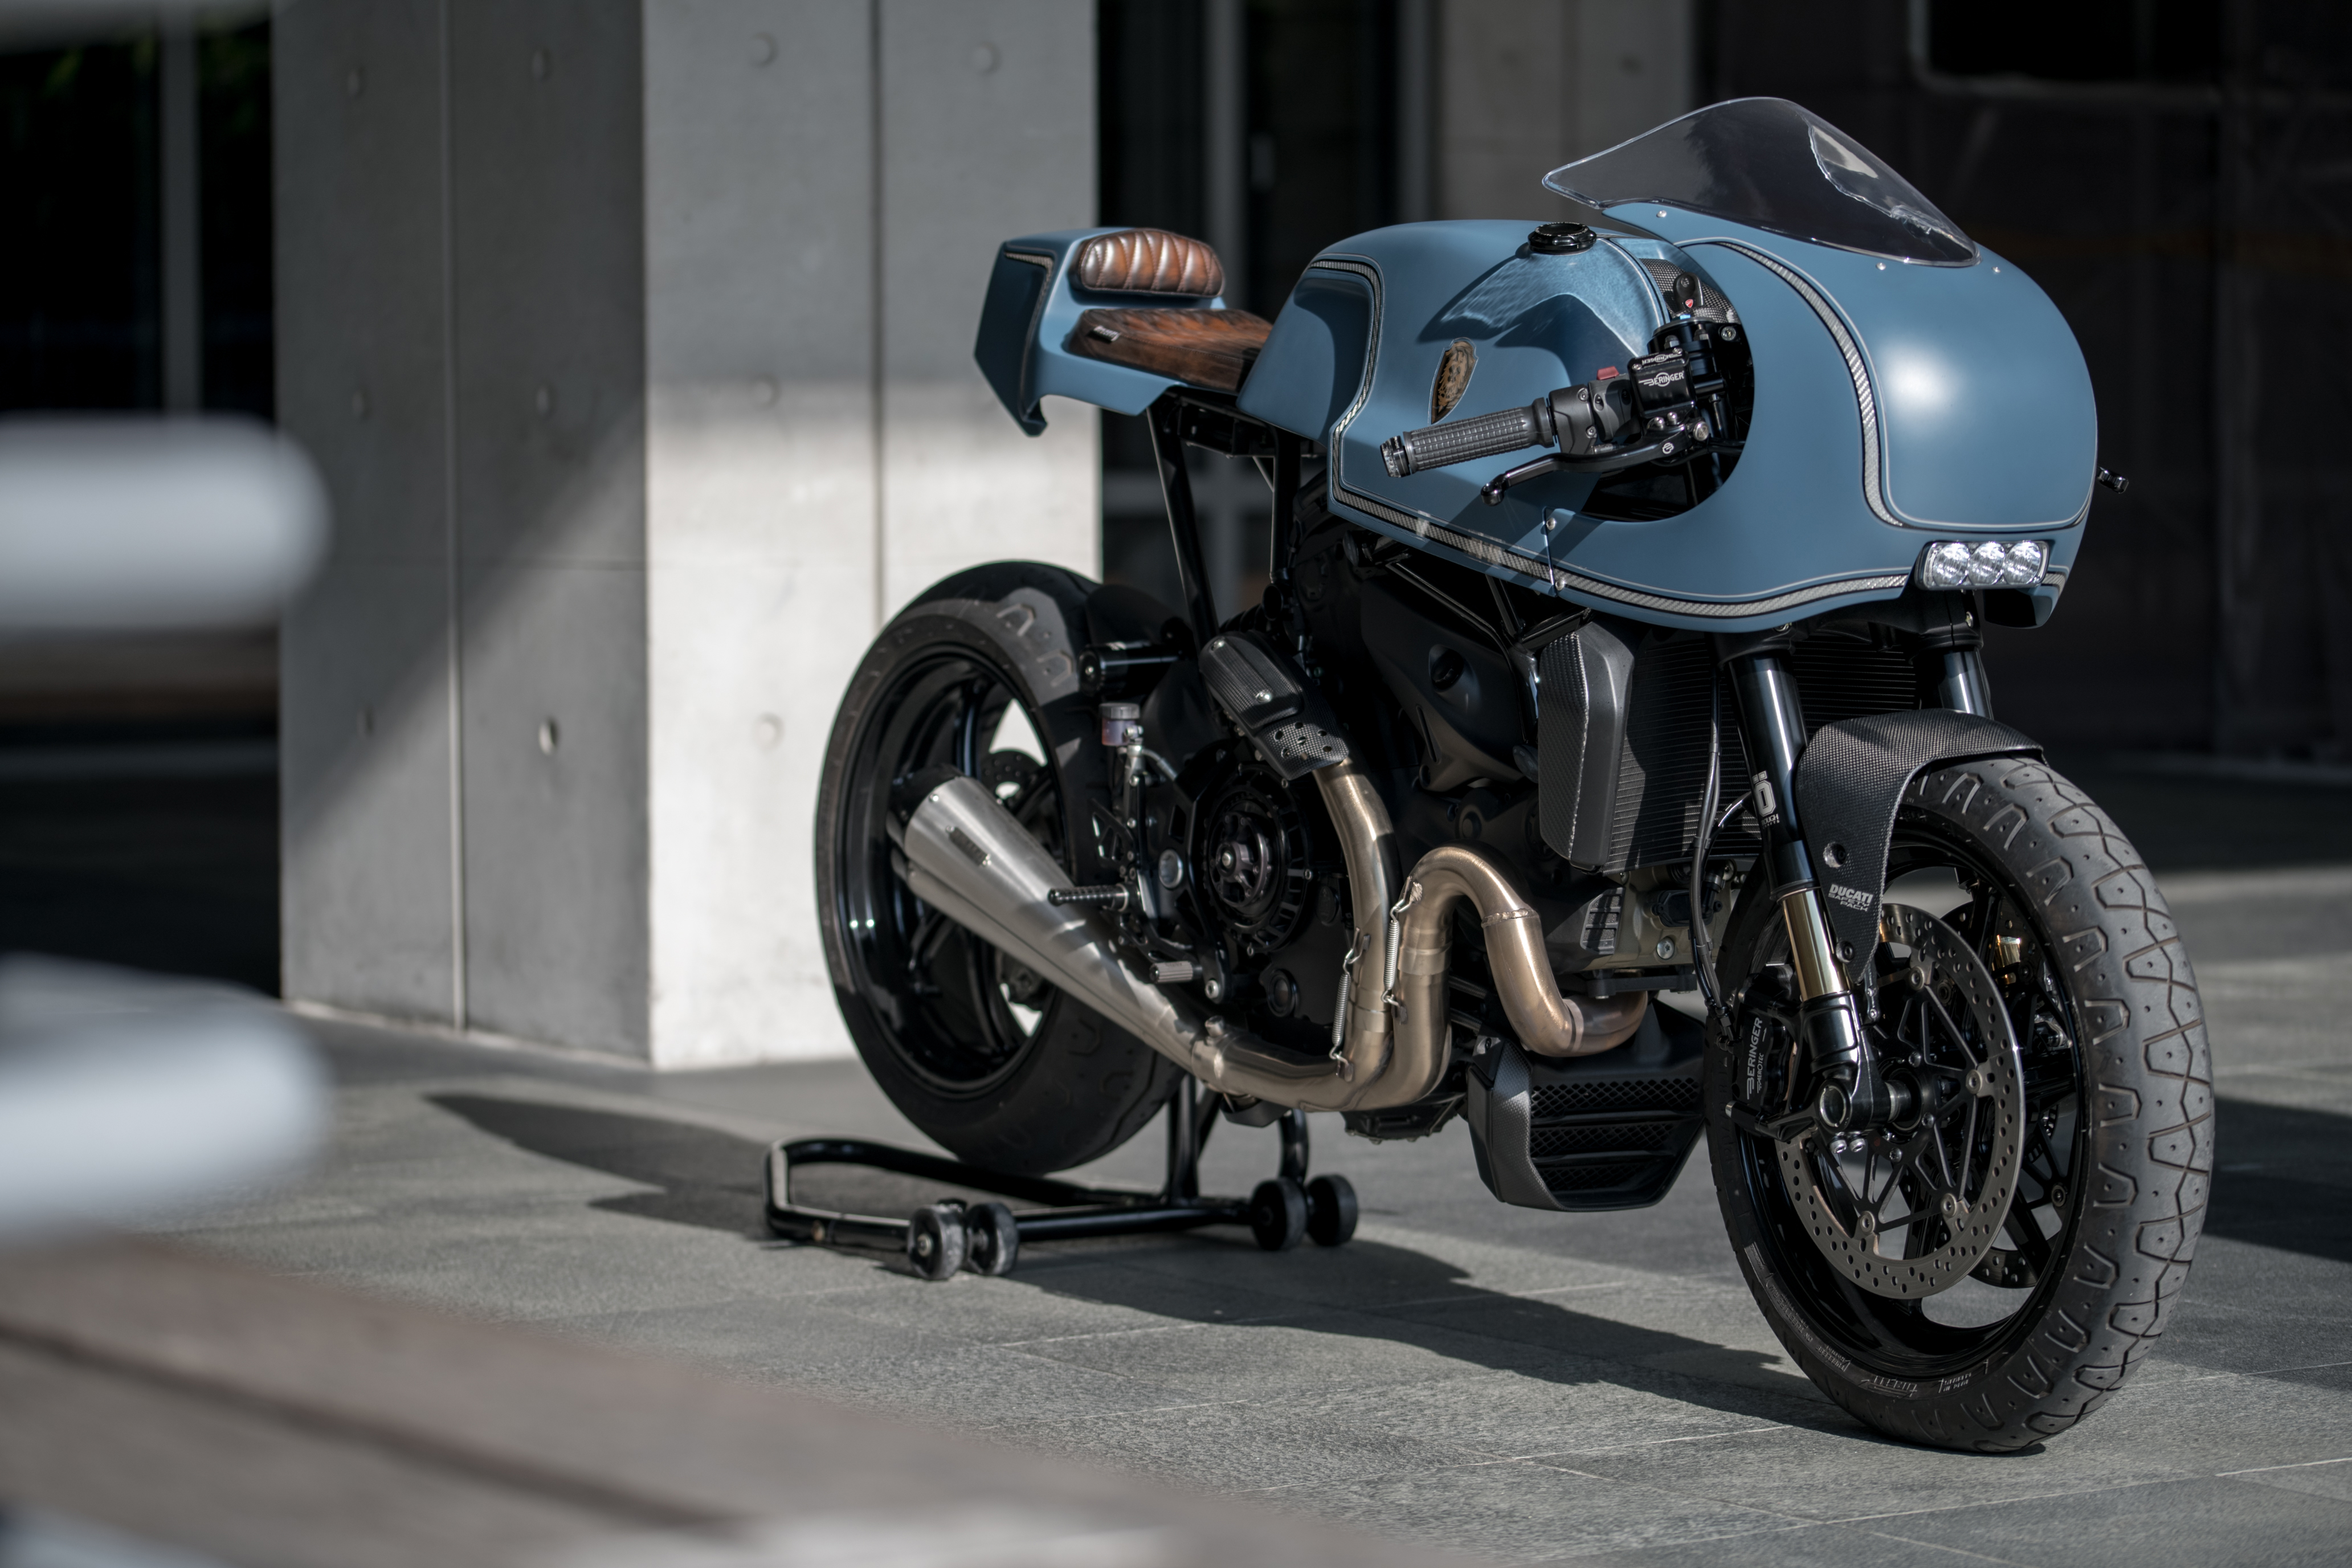 Ducati Monster 1200 S cafe racer by Rough Crafts